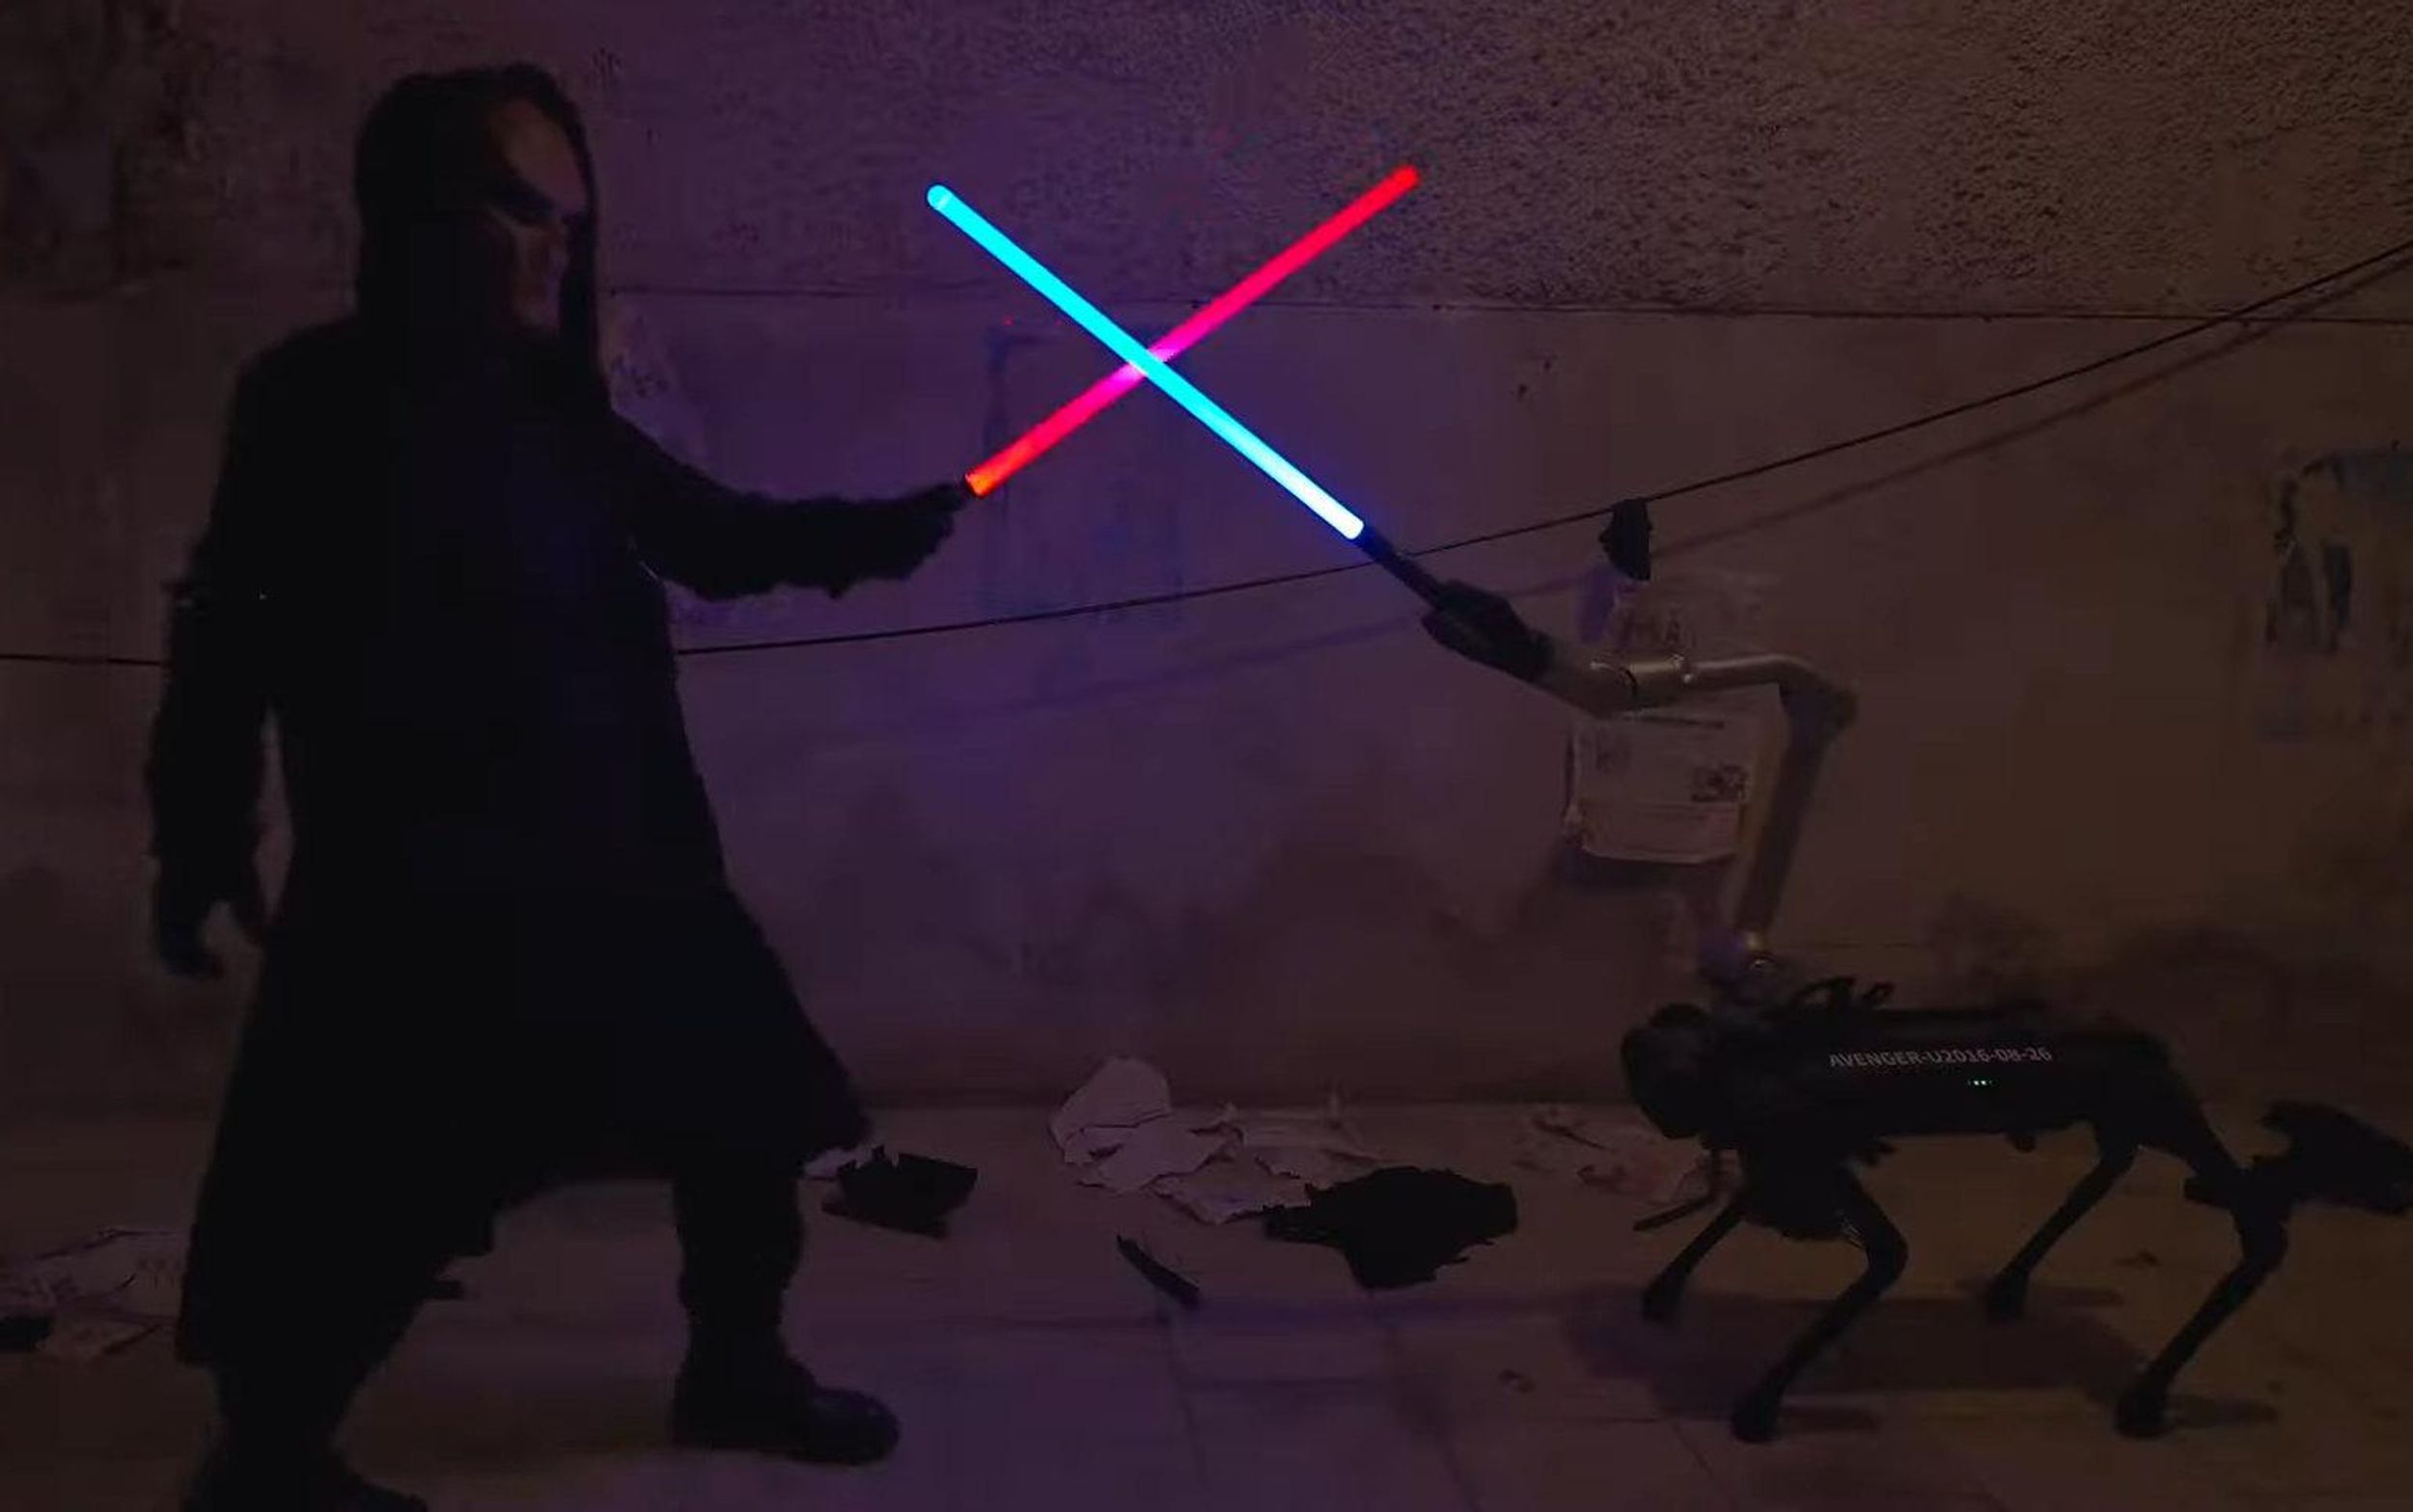 A small quadrupedal robot with an arm on its back holds a blue light saber against the red light saber of a human in a mask dressed in black